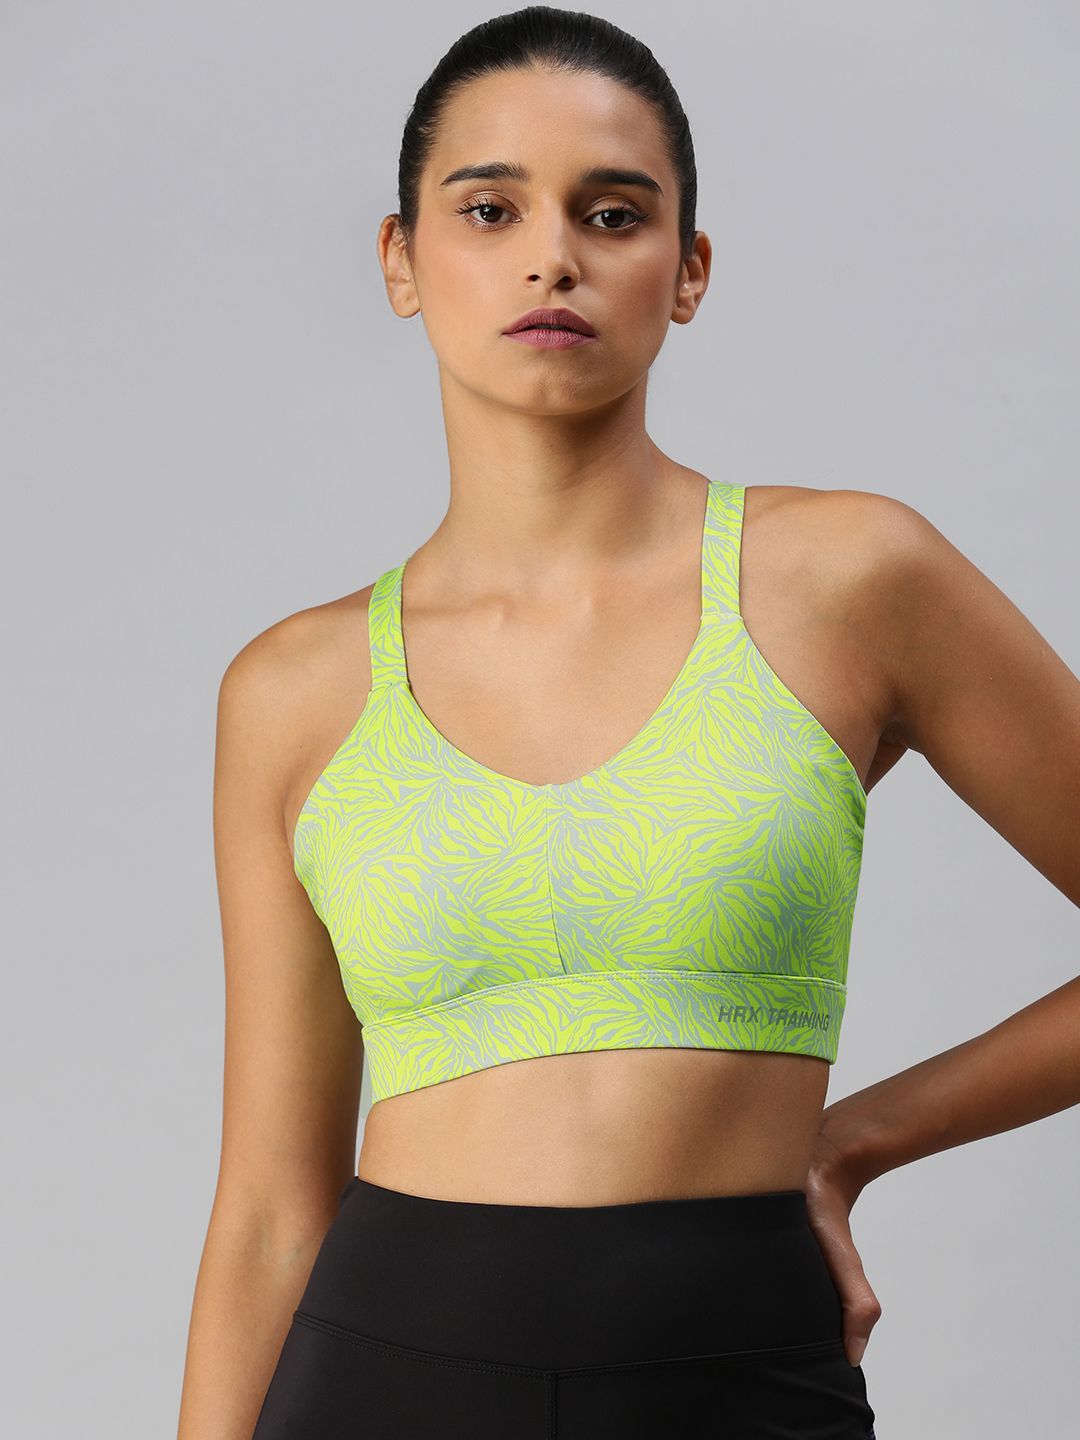 HRX on X: Unleash your inner athlete and gear up with the HRX Women's  Sports Bra collection 👊 Now available at incredible discounts during the @ myntra End Of Reason Sale. Start shopping